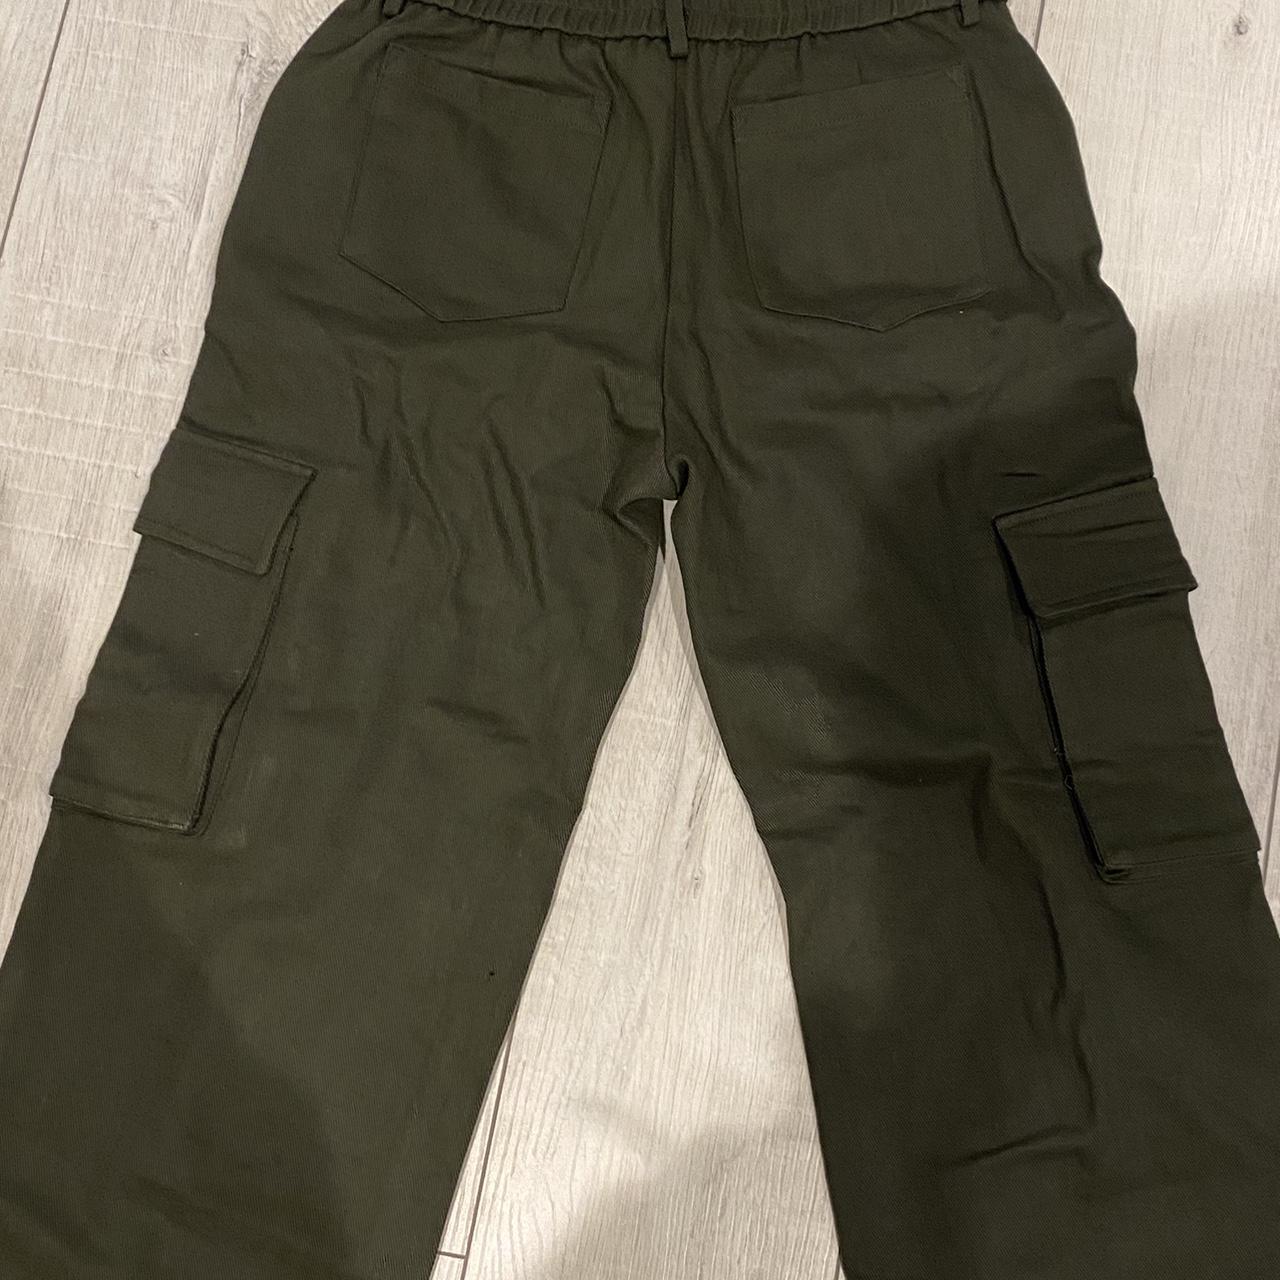 dark green cargo style trousers is a M would fit a... - Depop